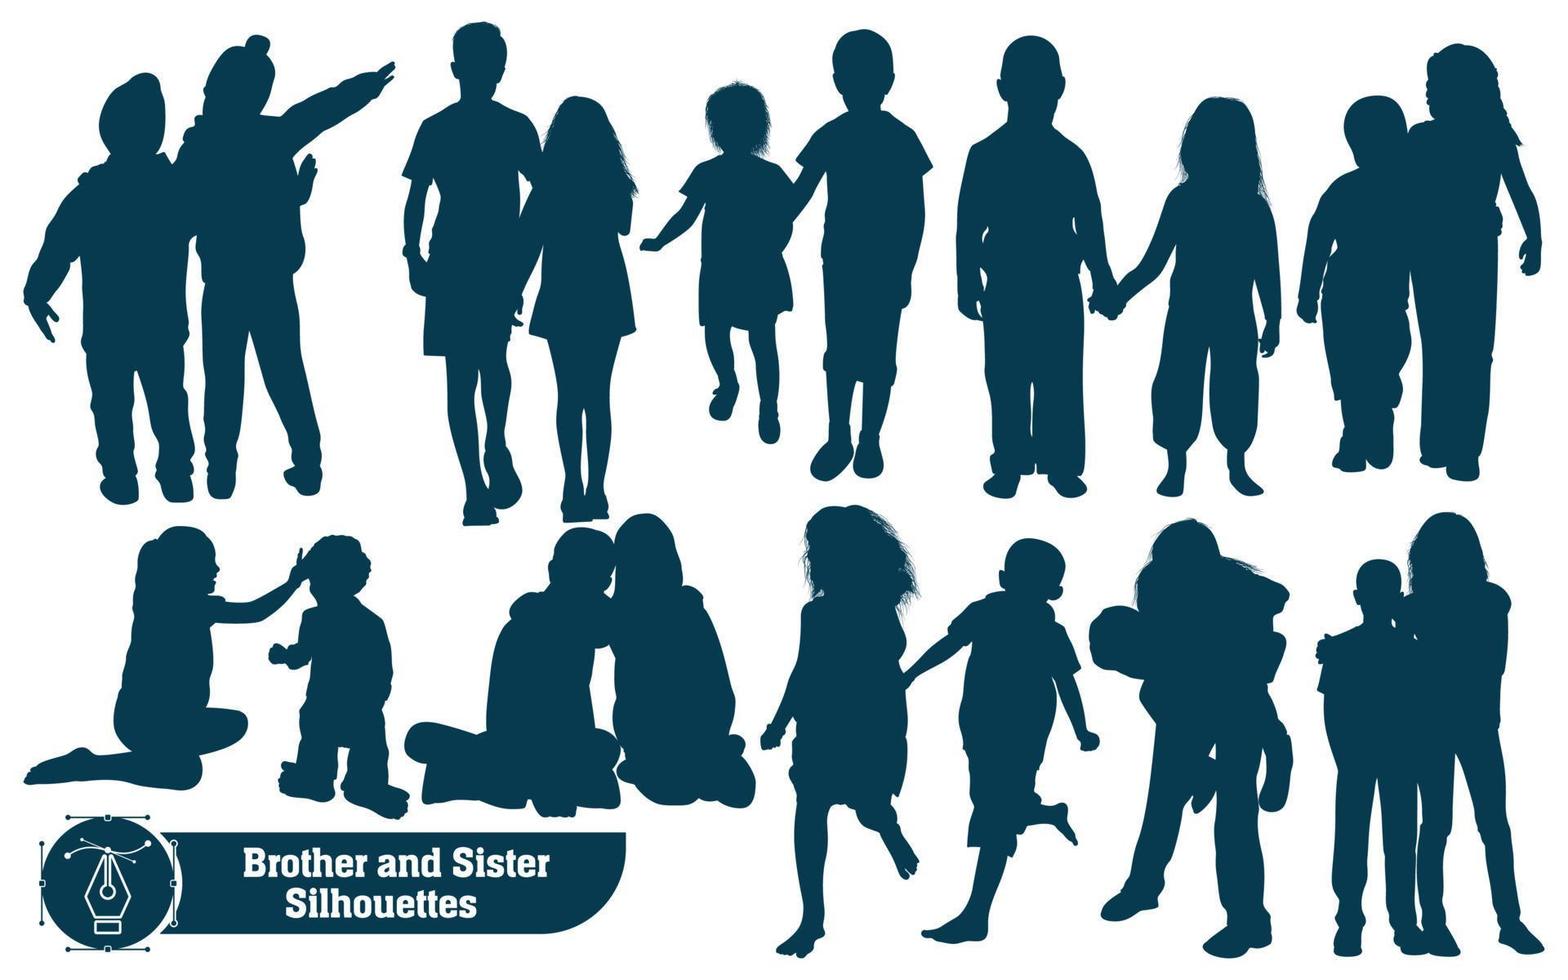 Collection of Brother and Sister Silhouettes in different poses set vector